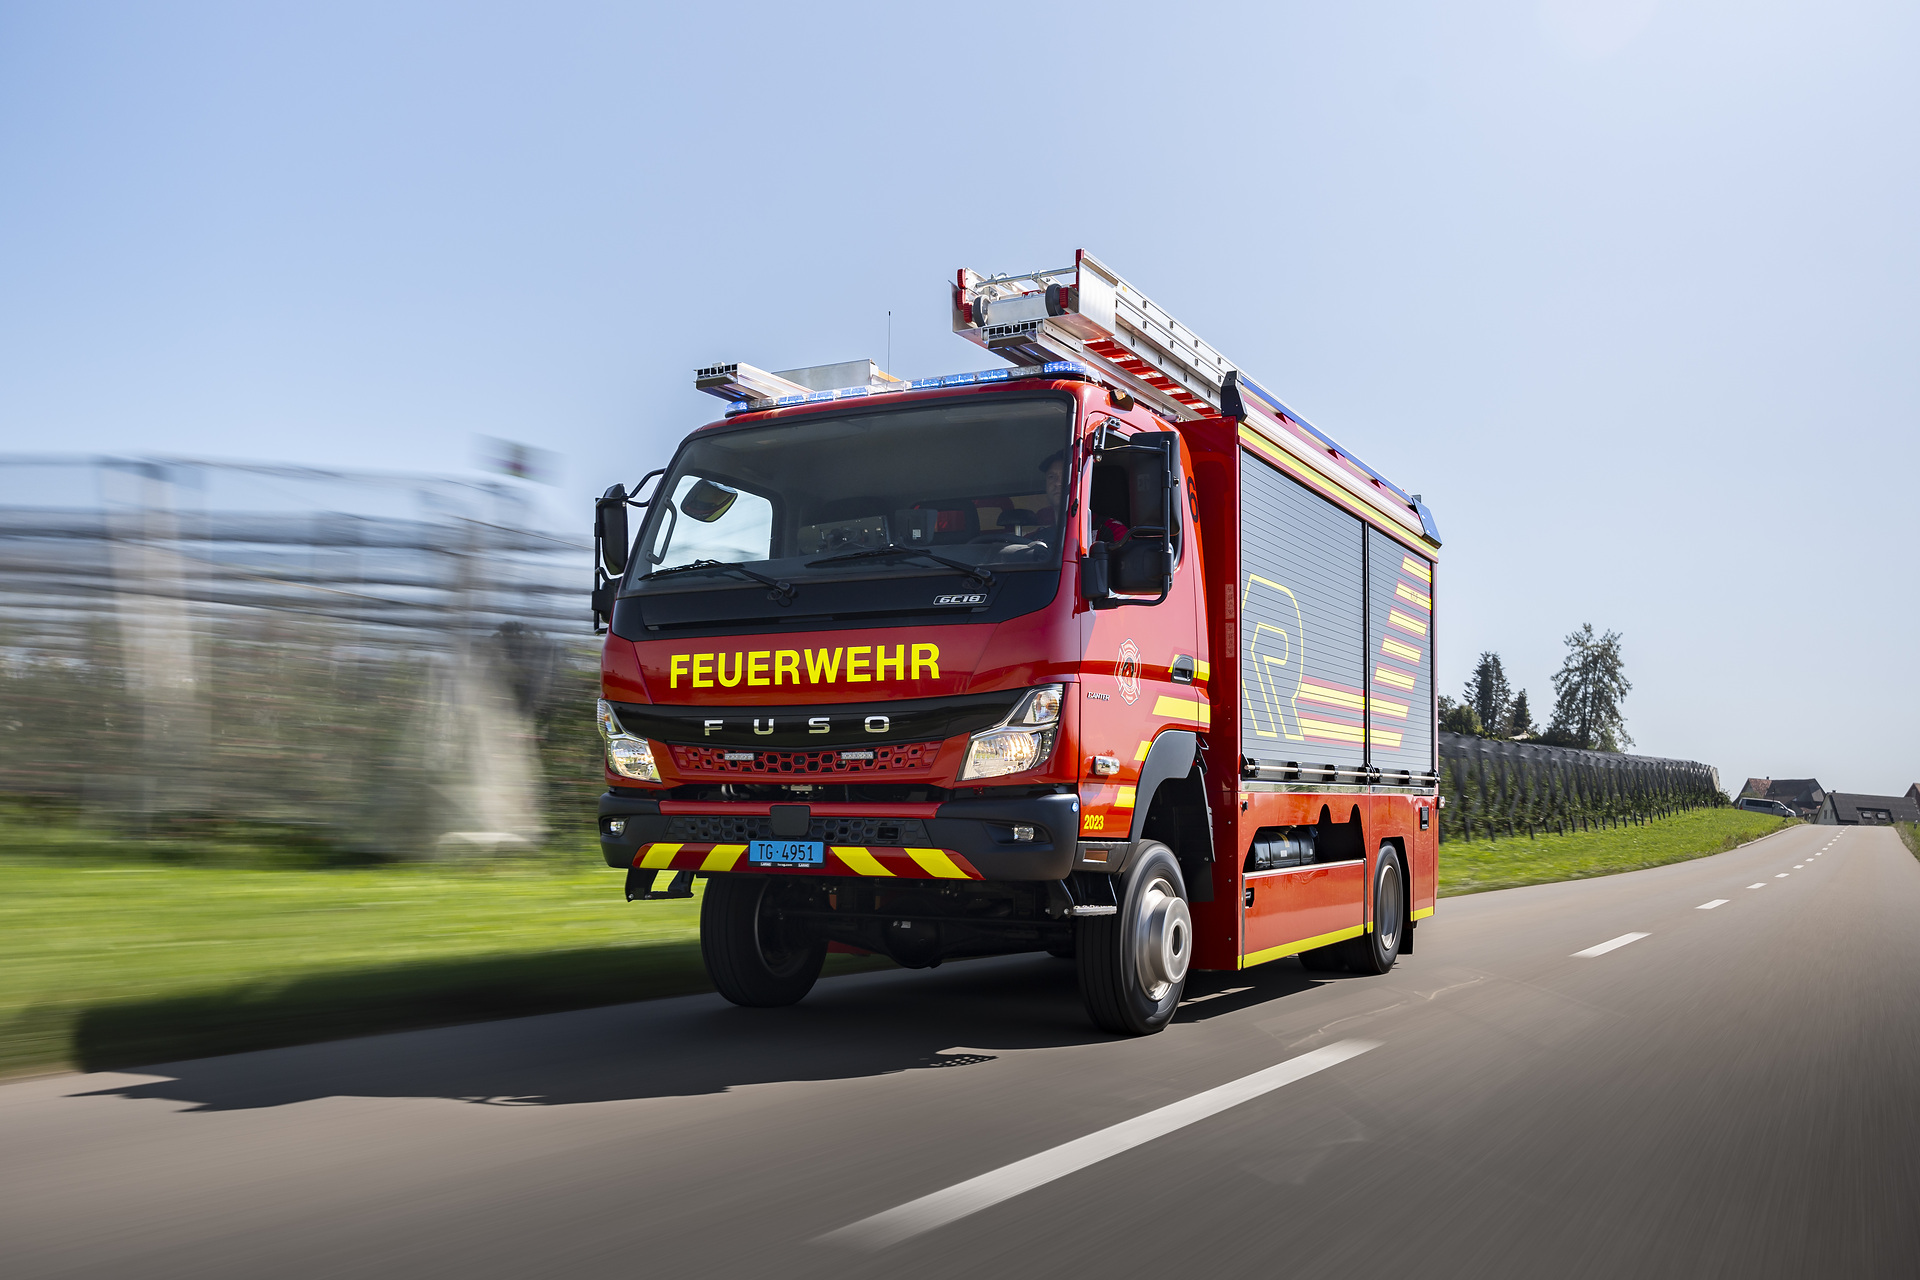 Rescue, extinguish, recover, protect: FUSO Canter 4x4 for the Swiss fire brigade